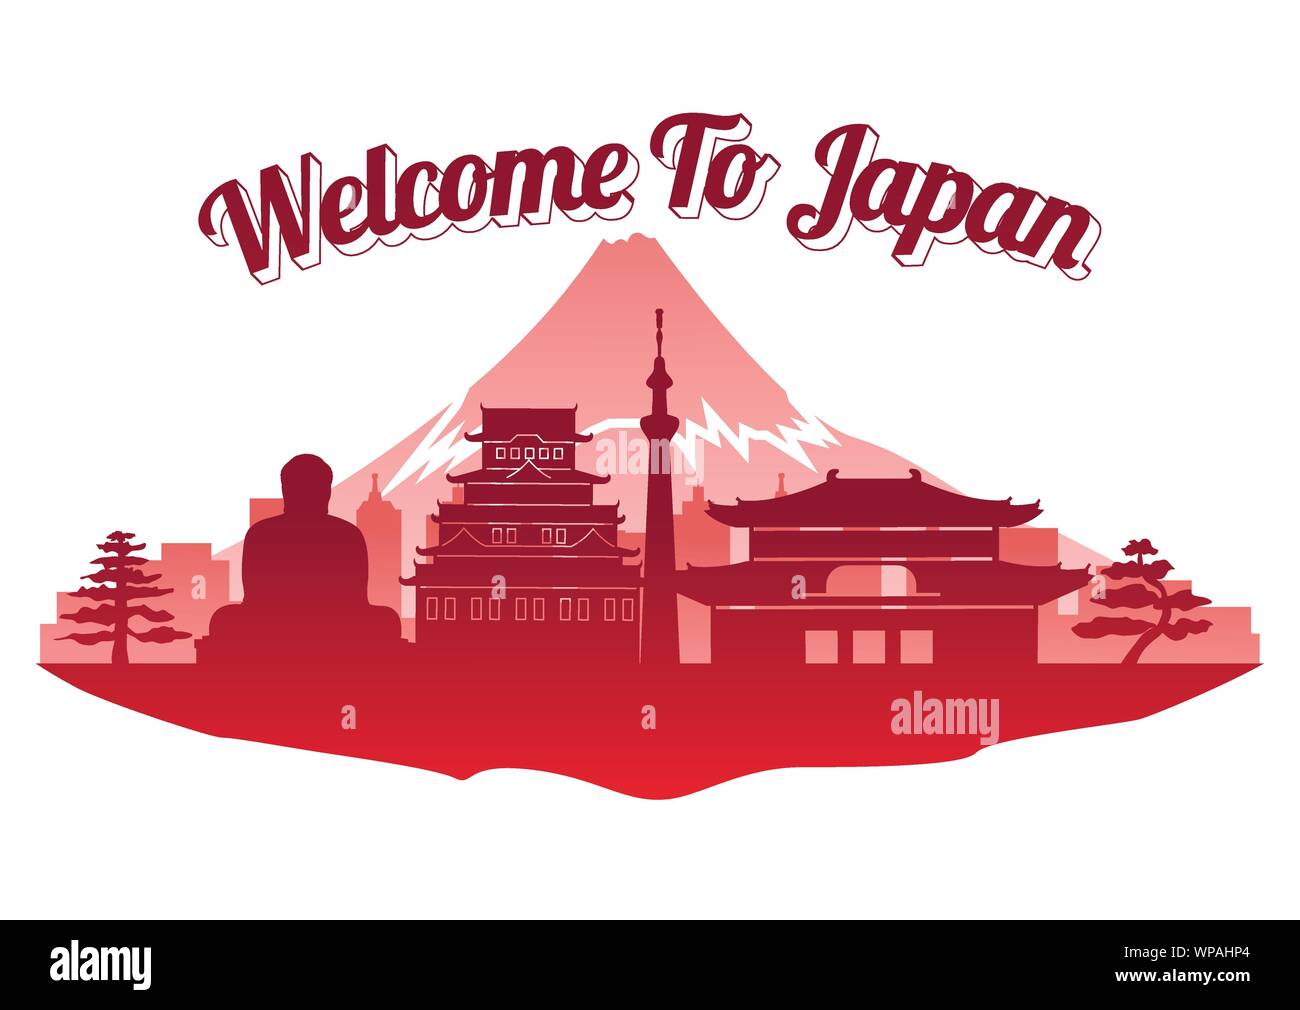 Japan top famous landmark silhouette style on island  famous landmark silhouette style,welcome to Japan,travel and tourism,vector illustration Stock Vector